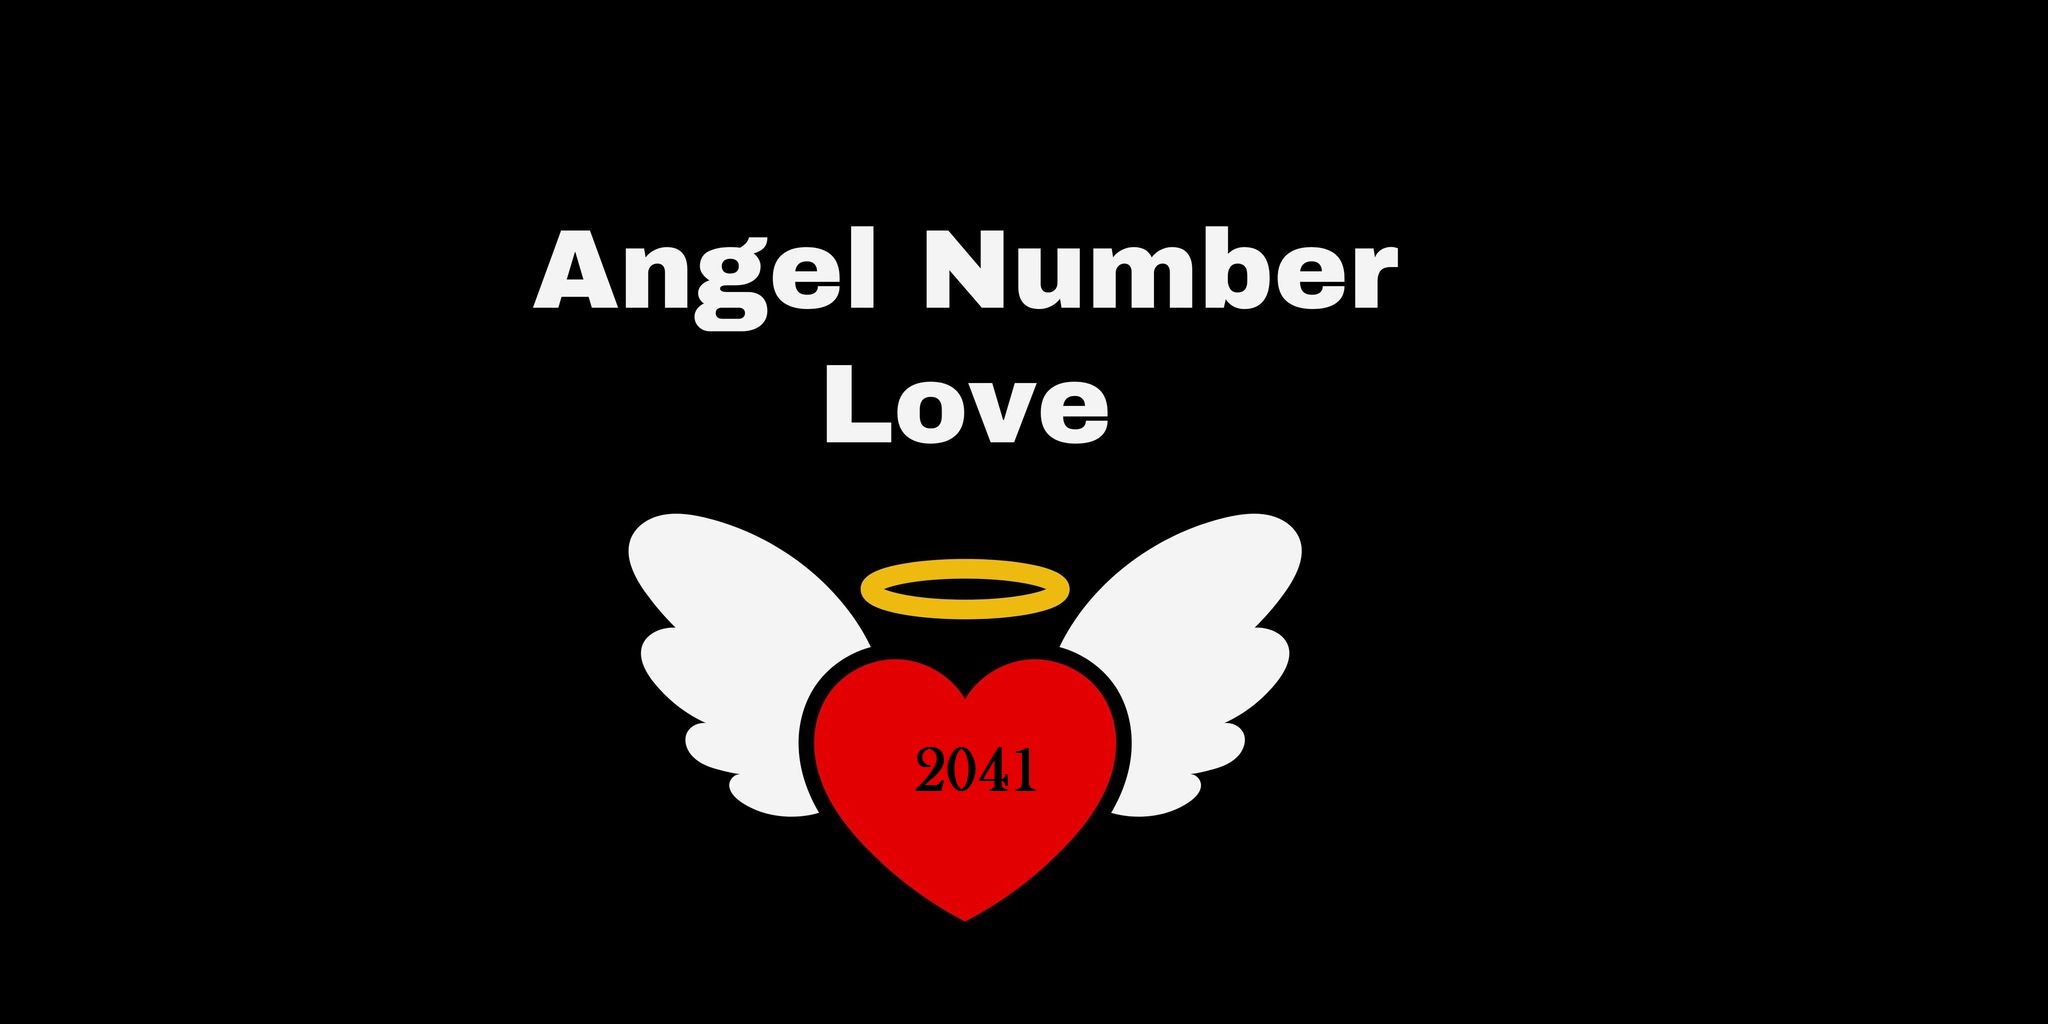 2041 Angel Number Meaning In Love